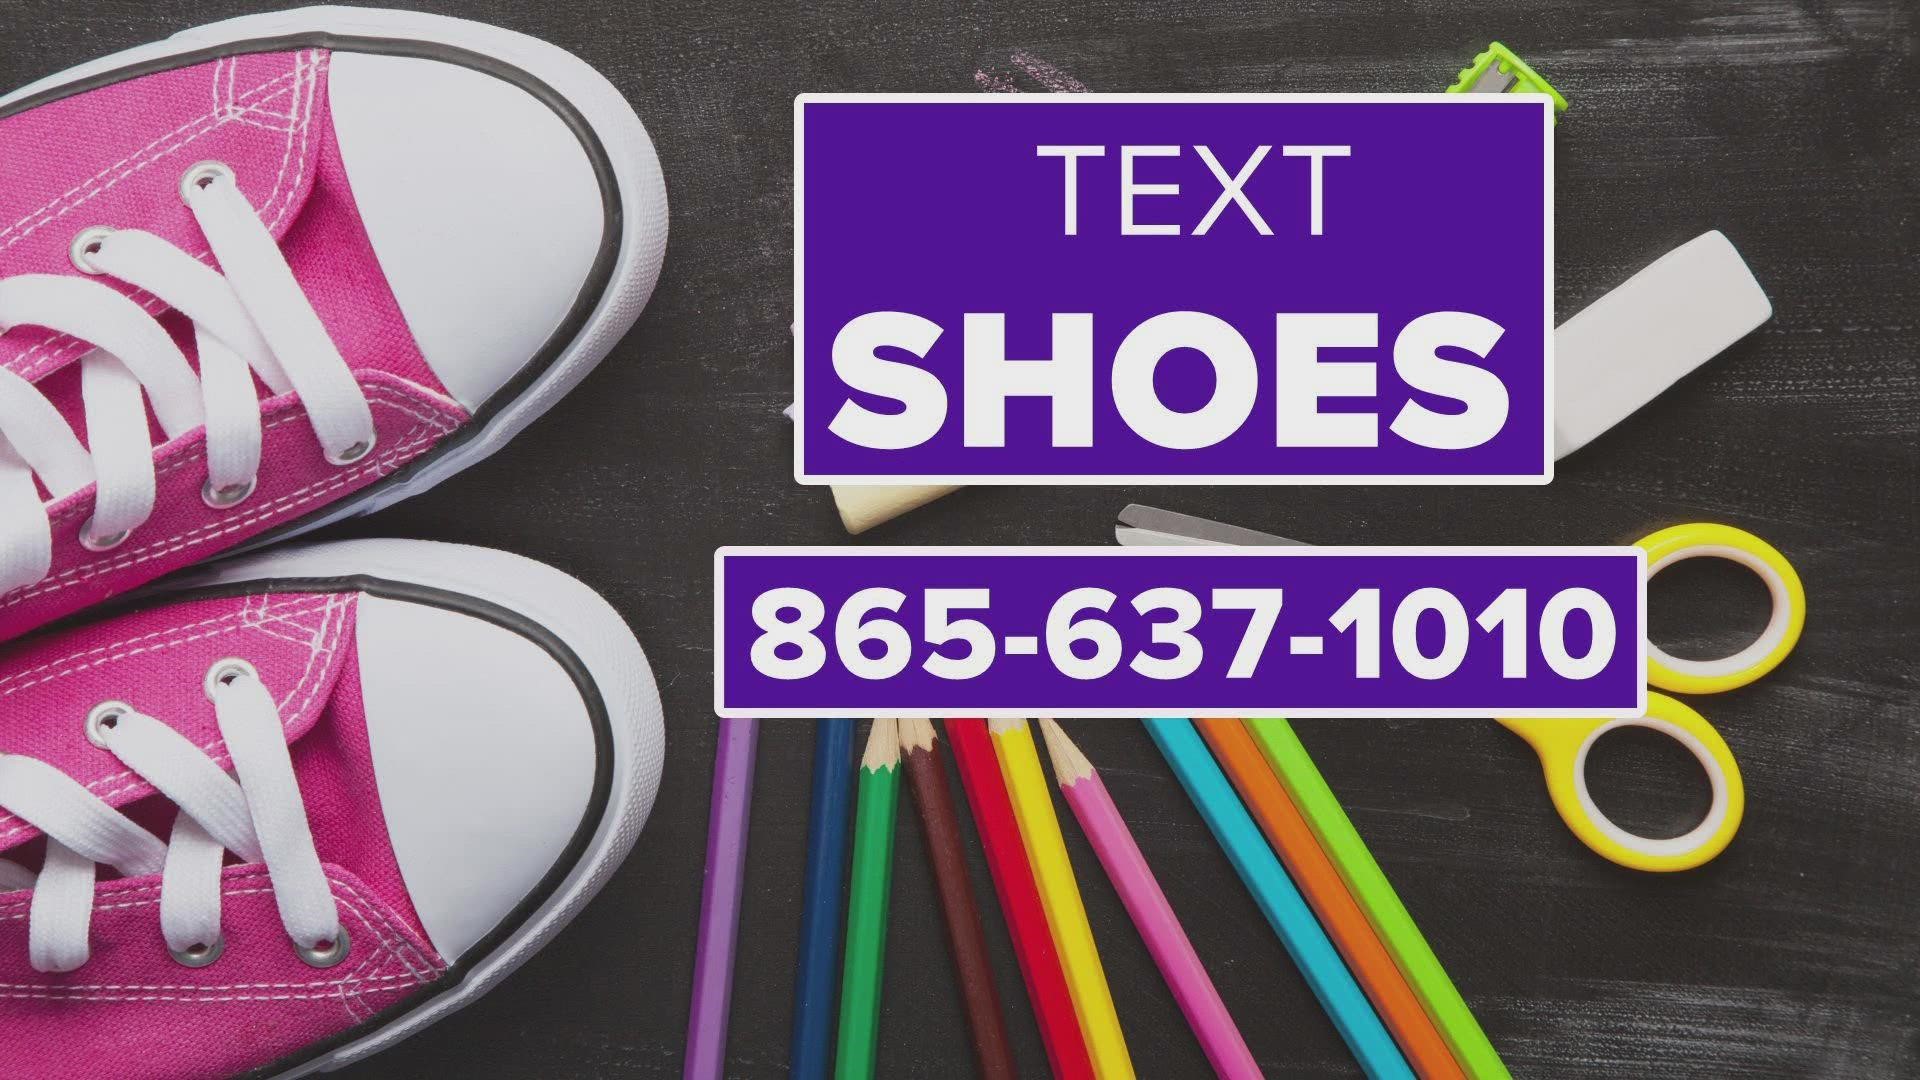 The Knoxville Urban League is looking for volunteers to assist in their big event, Shoes for Schools.